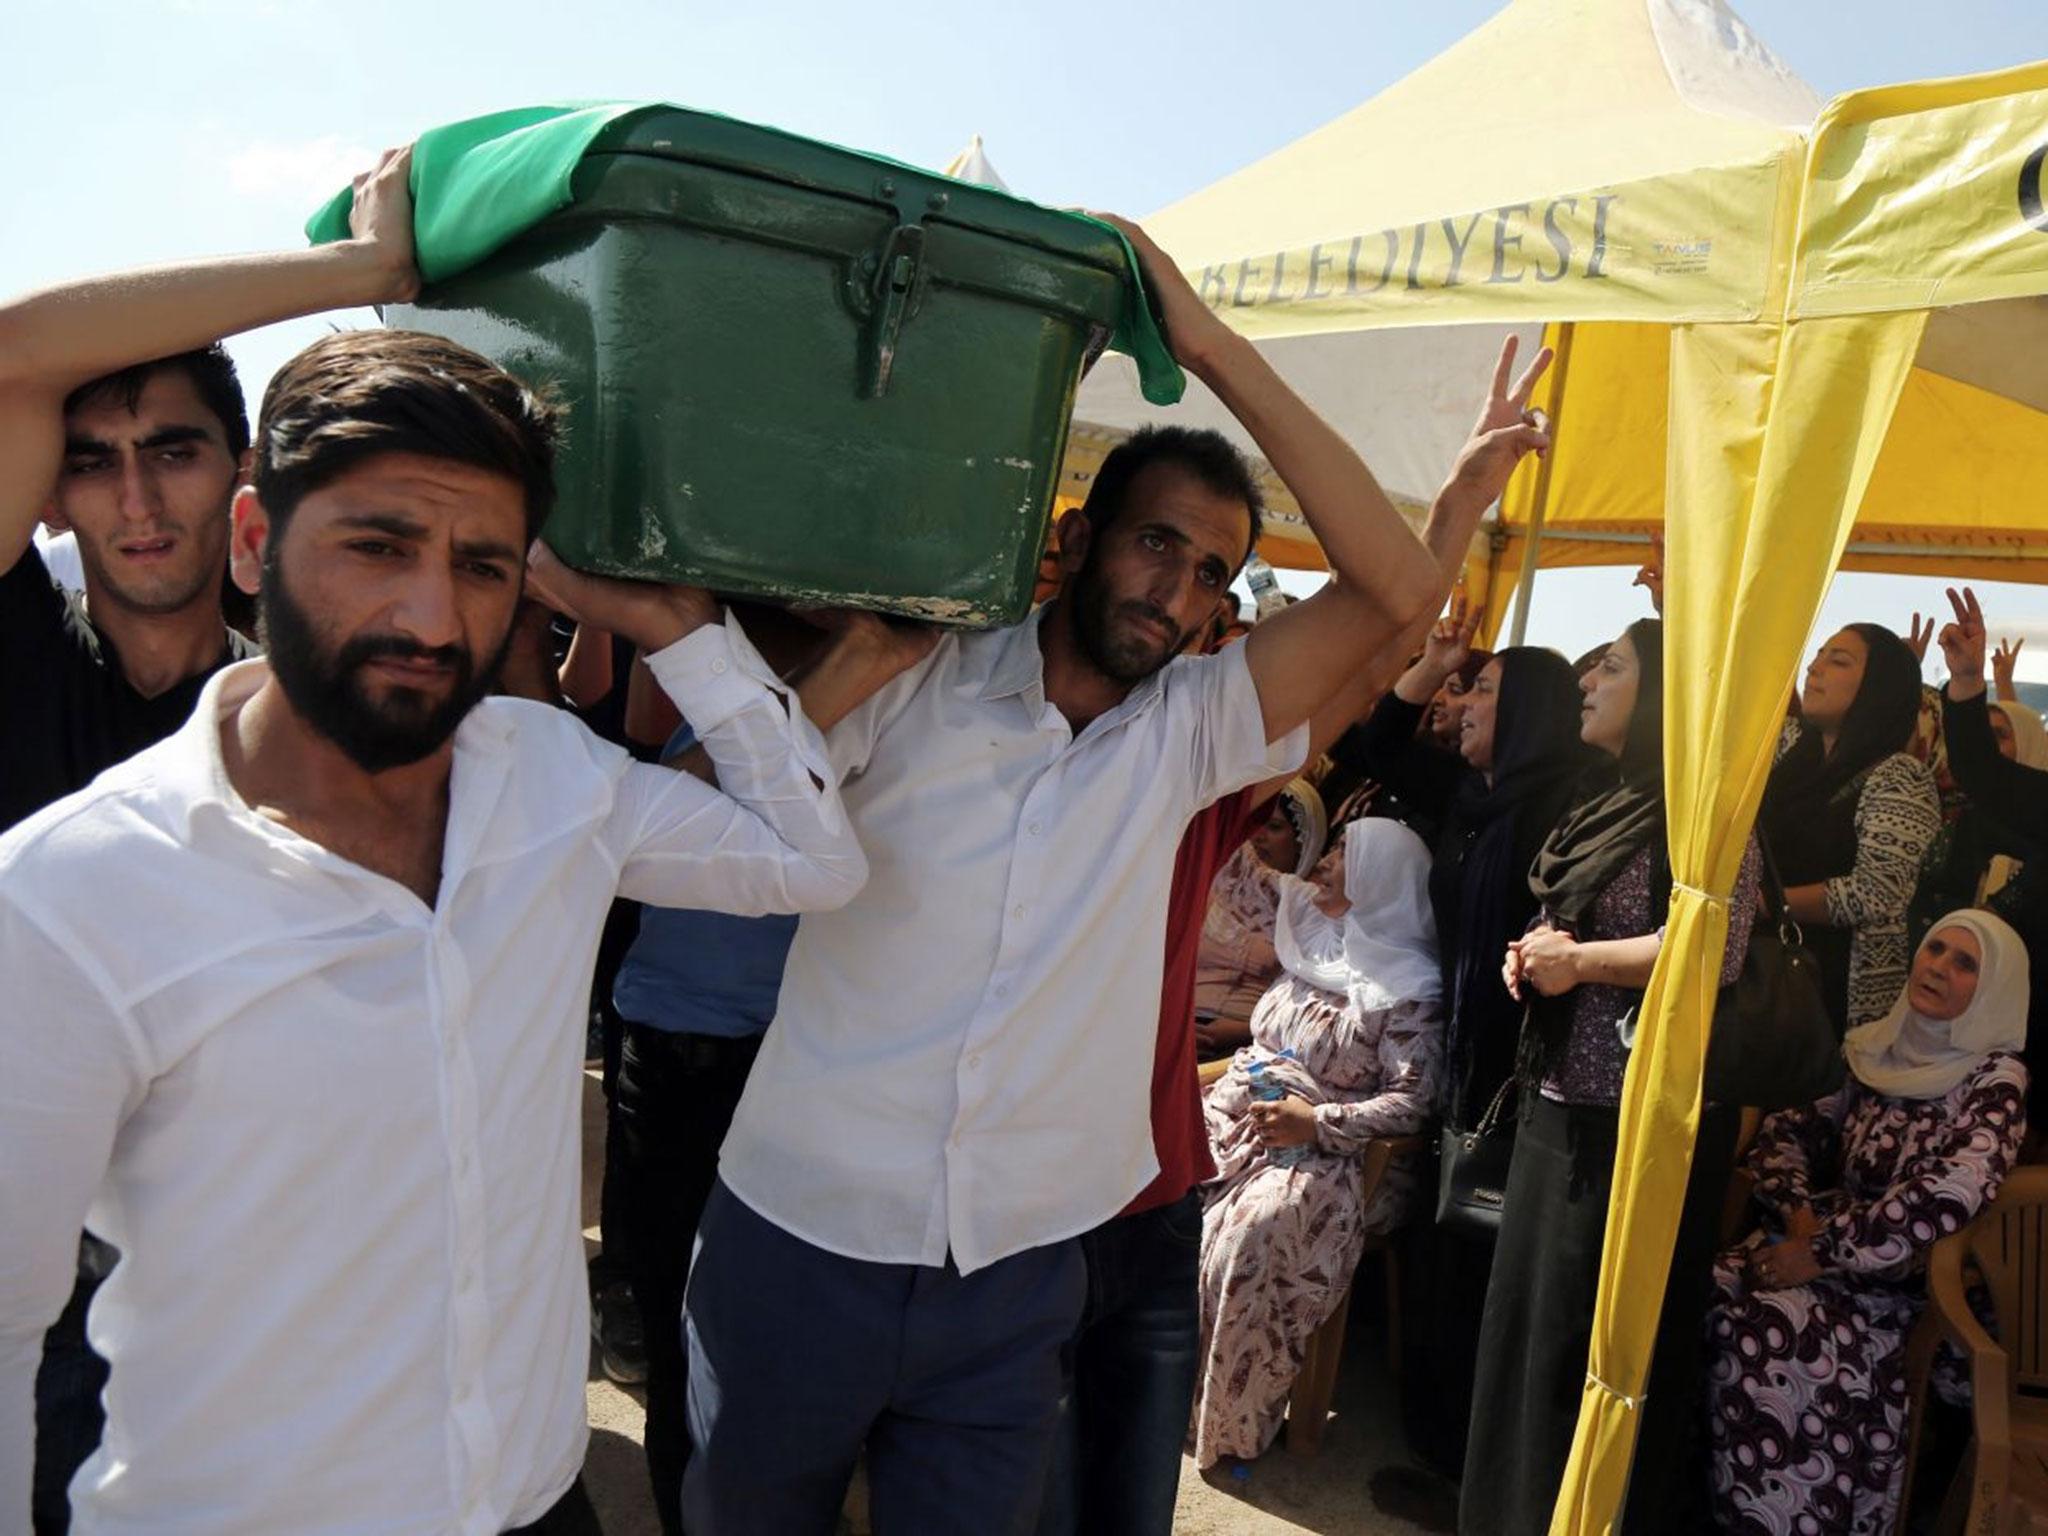 People carry a victim's coffin as they attend funeral services for dozens of people killed in last night's bomb attack targeting an outdoor wedding party in Gaziantep, southeastern Turkey, Sunday, 21 August, 2016